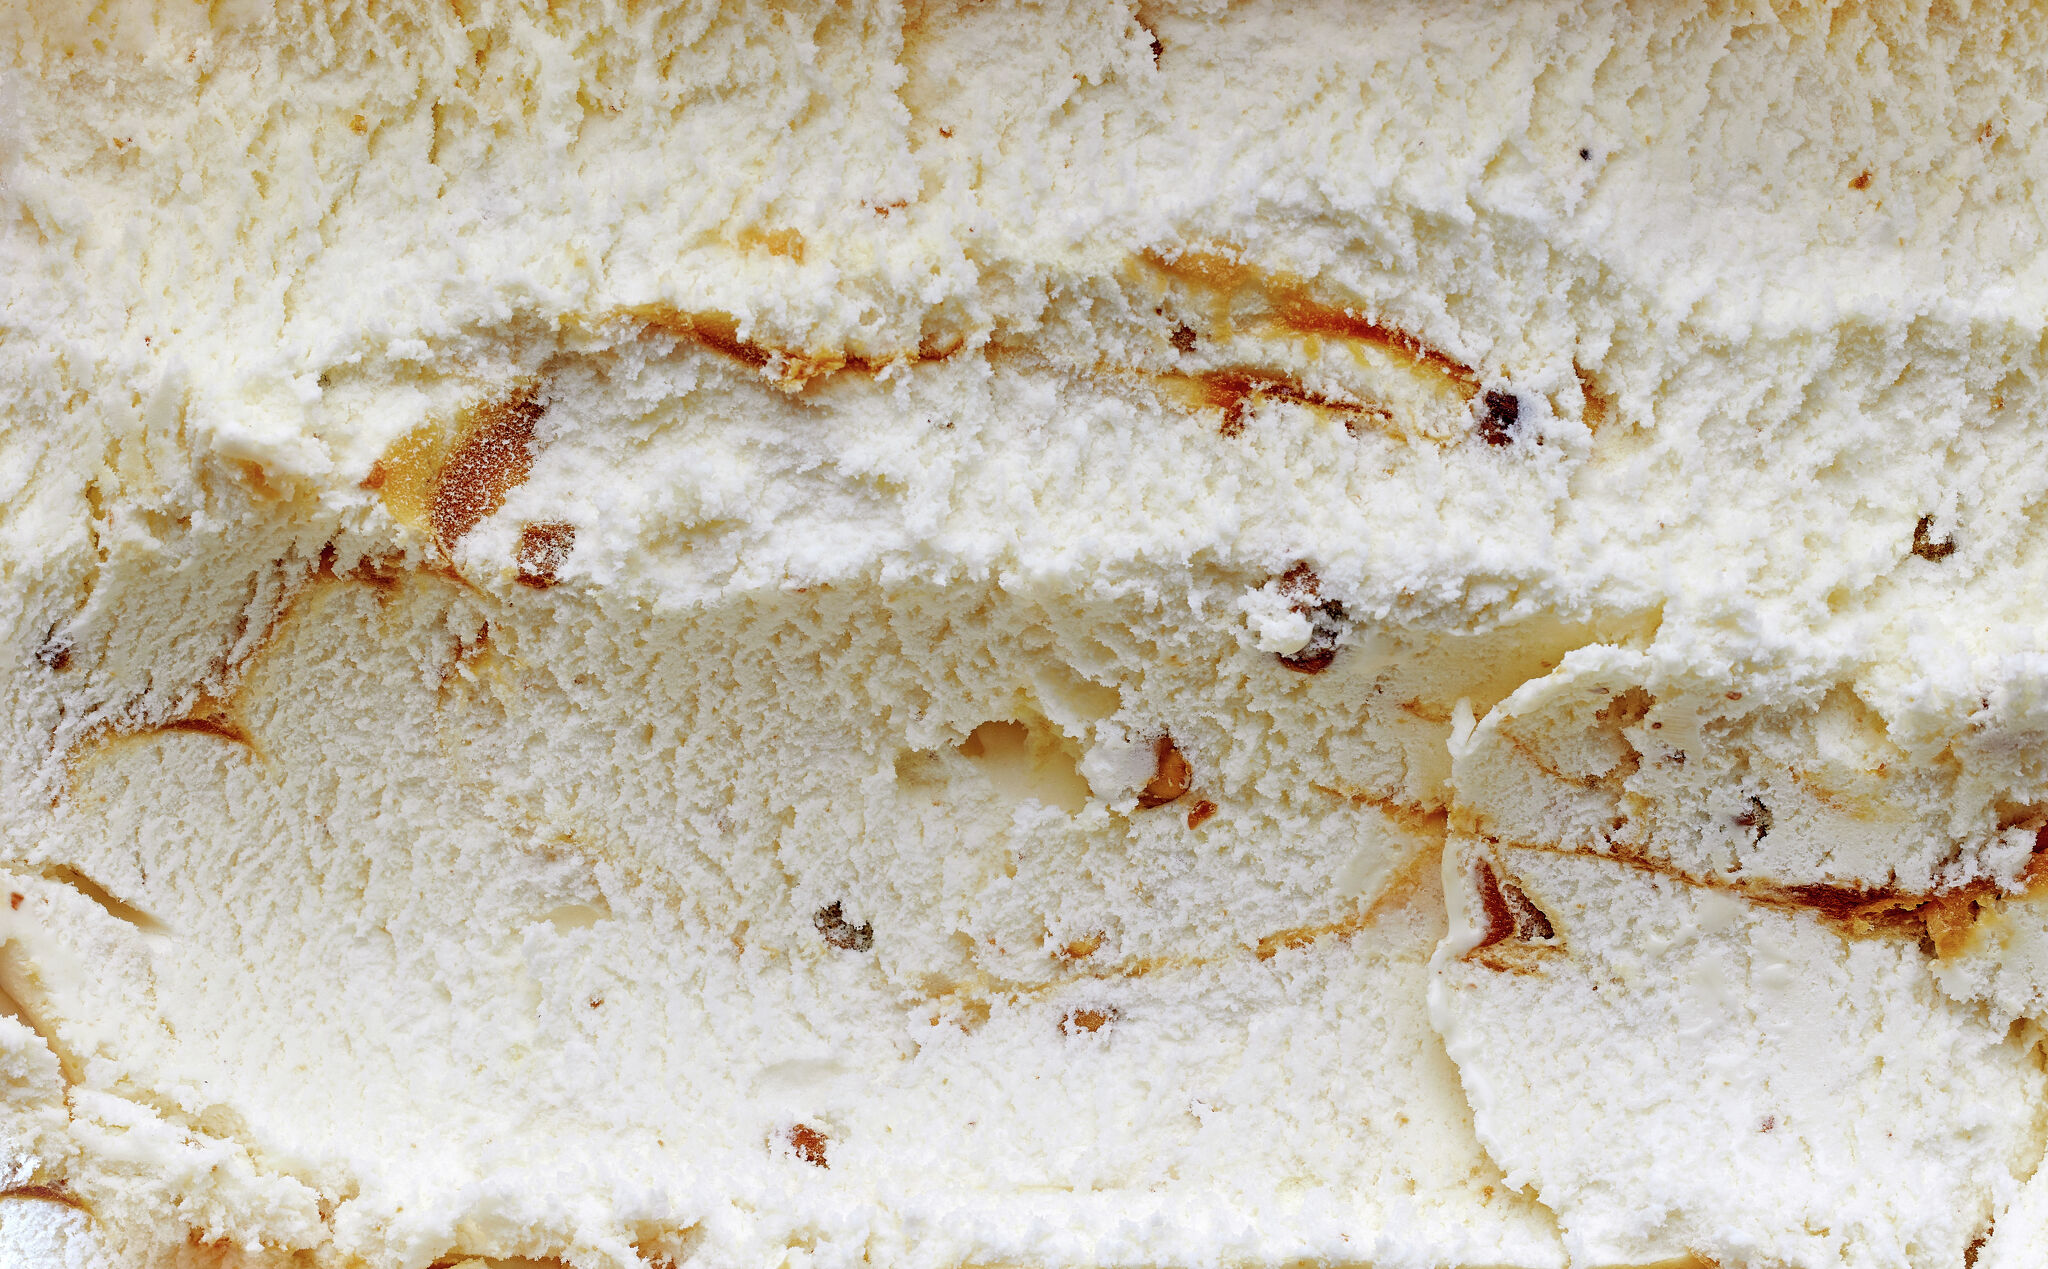 Ice cream sold in Texas recalled due to potential listeria 